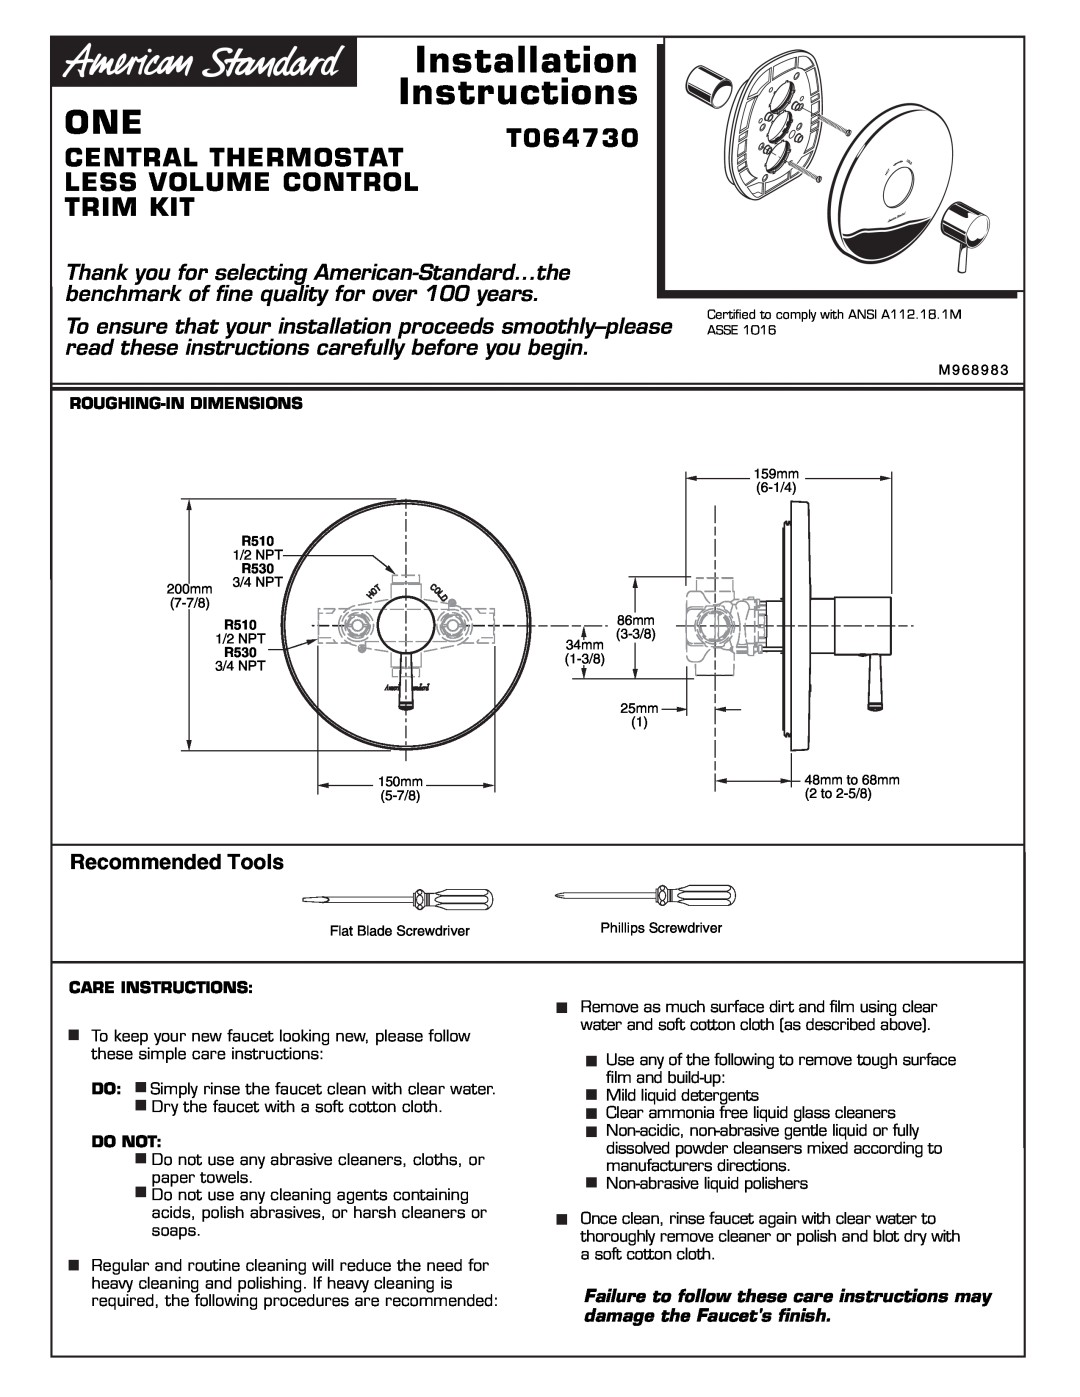 American Standard M968983 installation instructions T064730, Central Thermostat, Less Volume Control, Trim Kit 